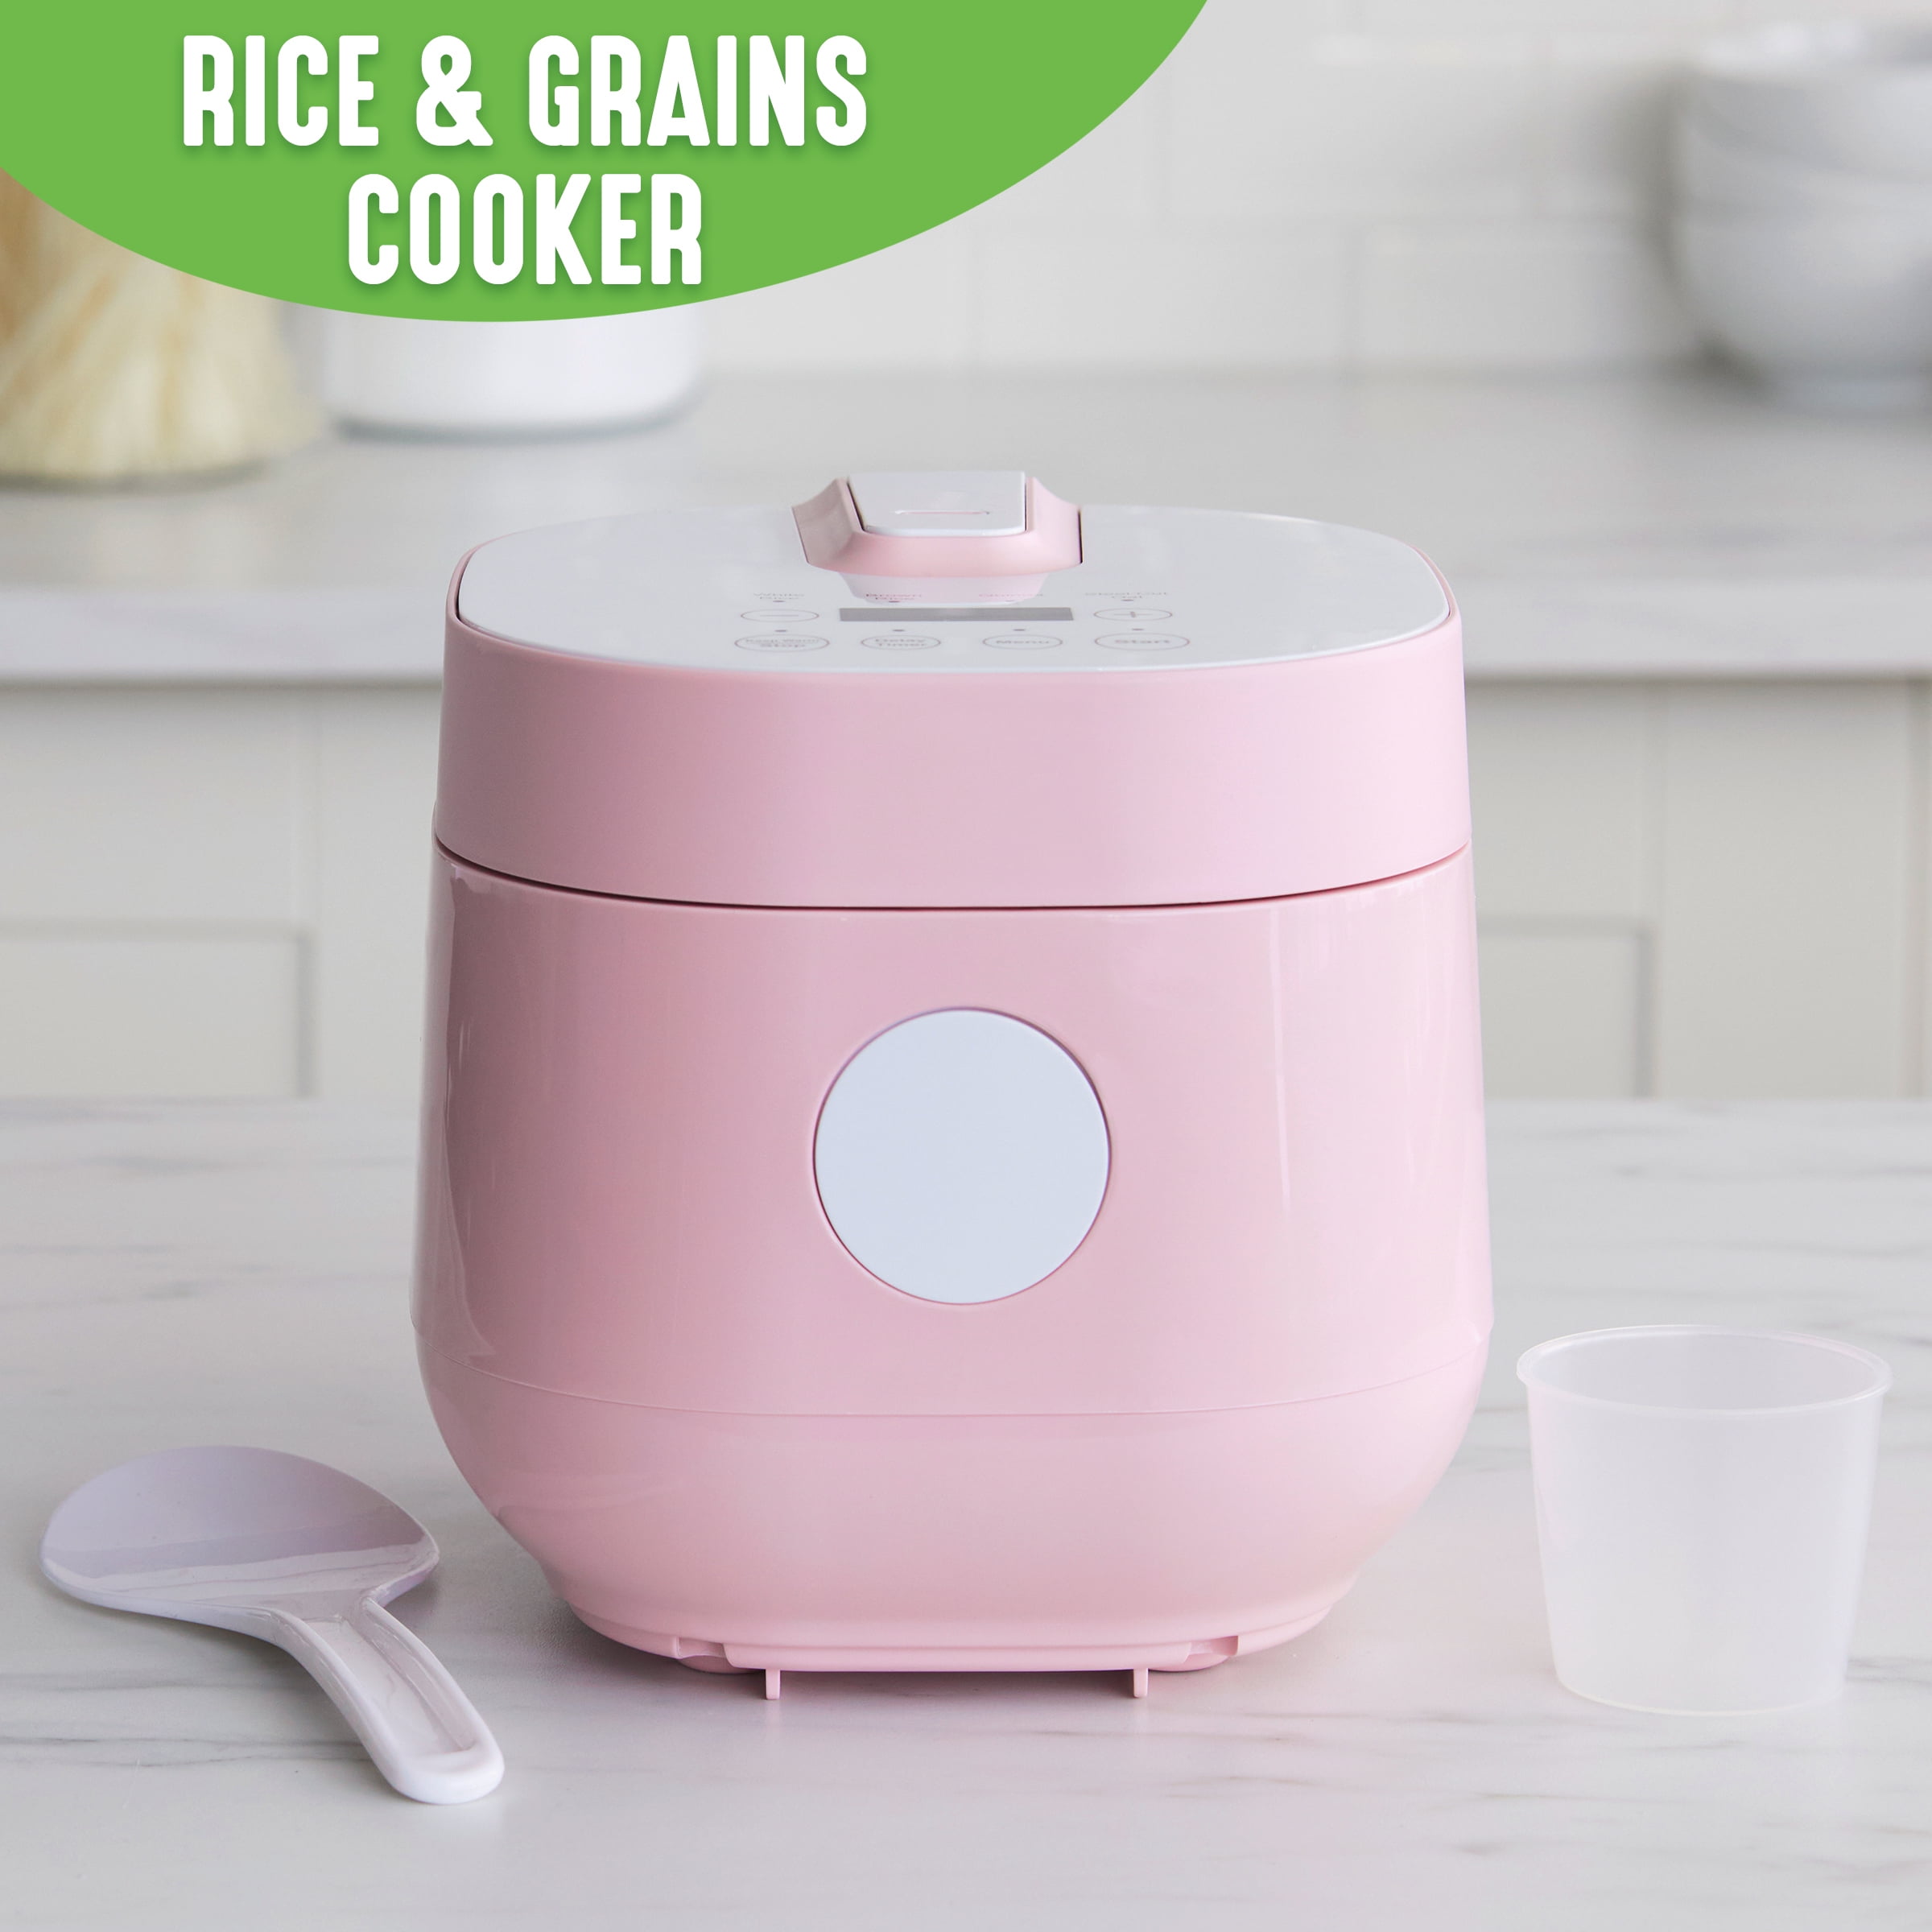 GreenLife Turquoise Rice Cooker - Blue